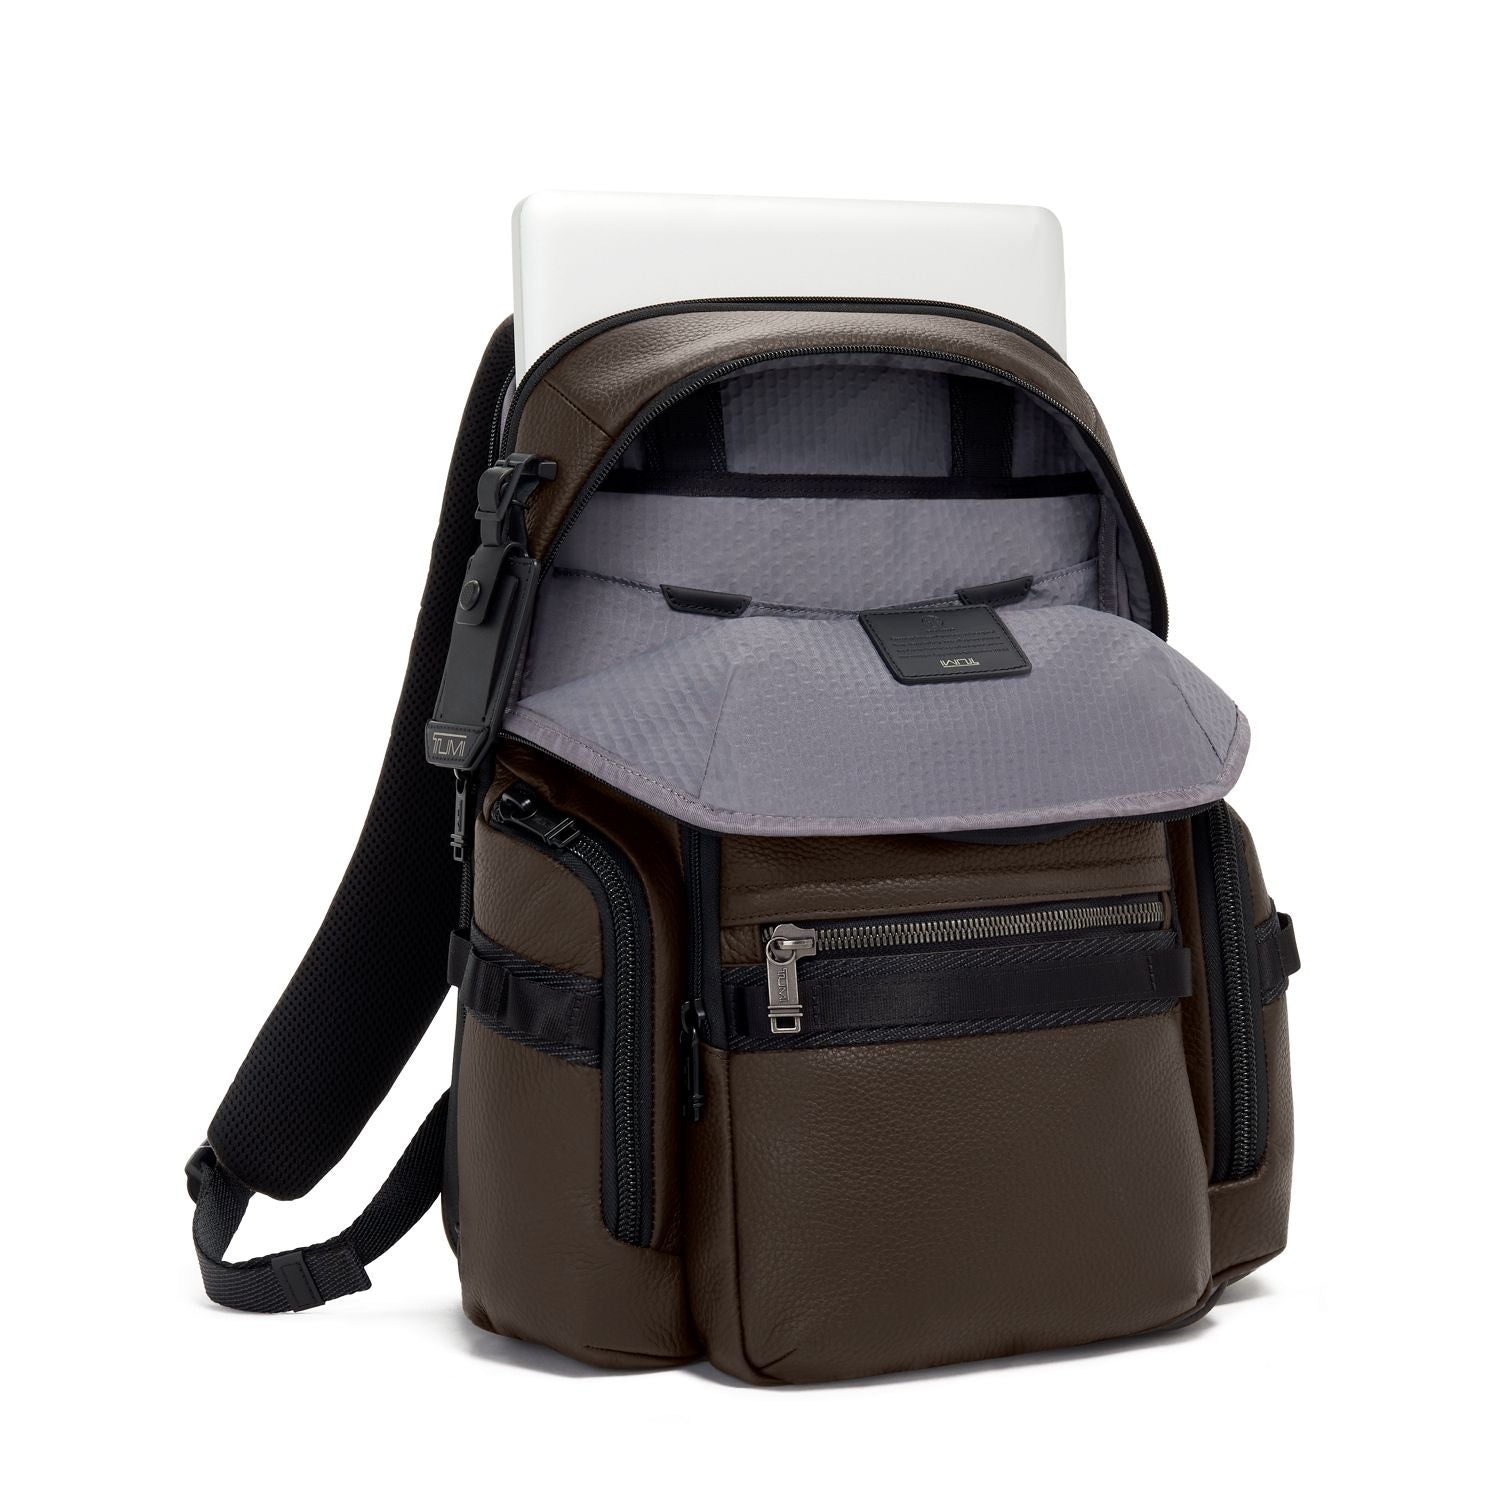 Daisy Rose Backpack Review and What Laptop Fits